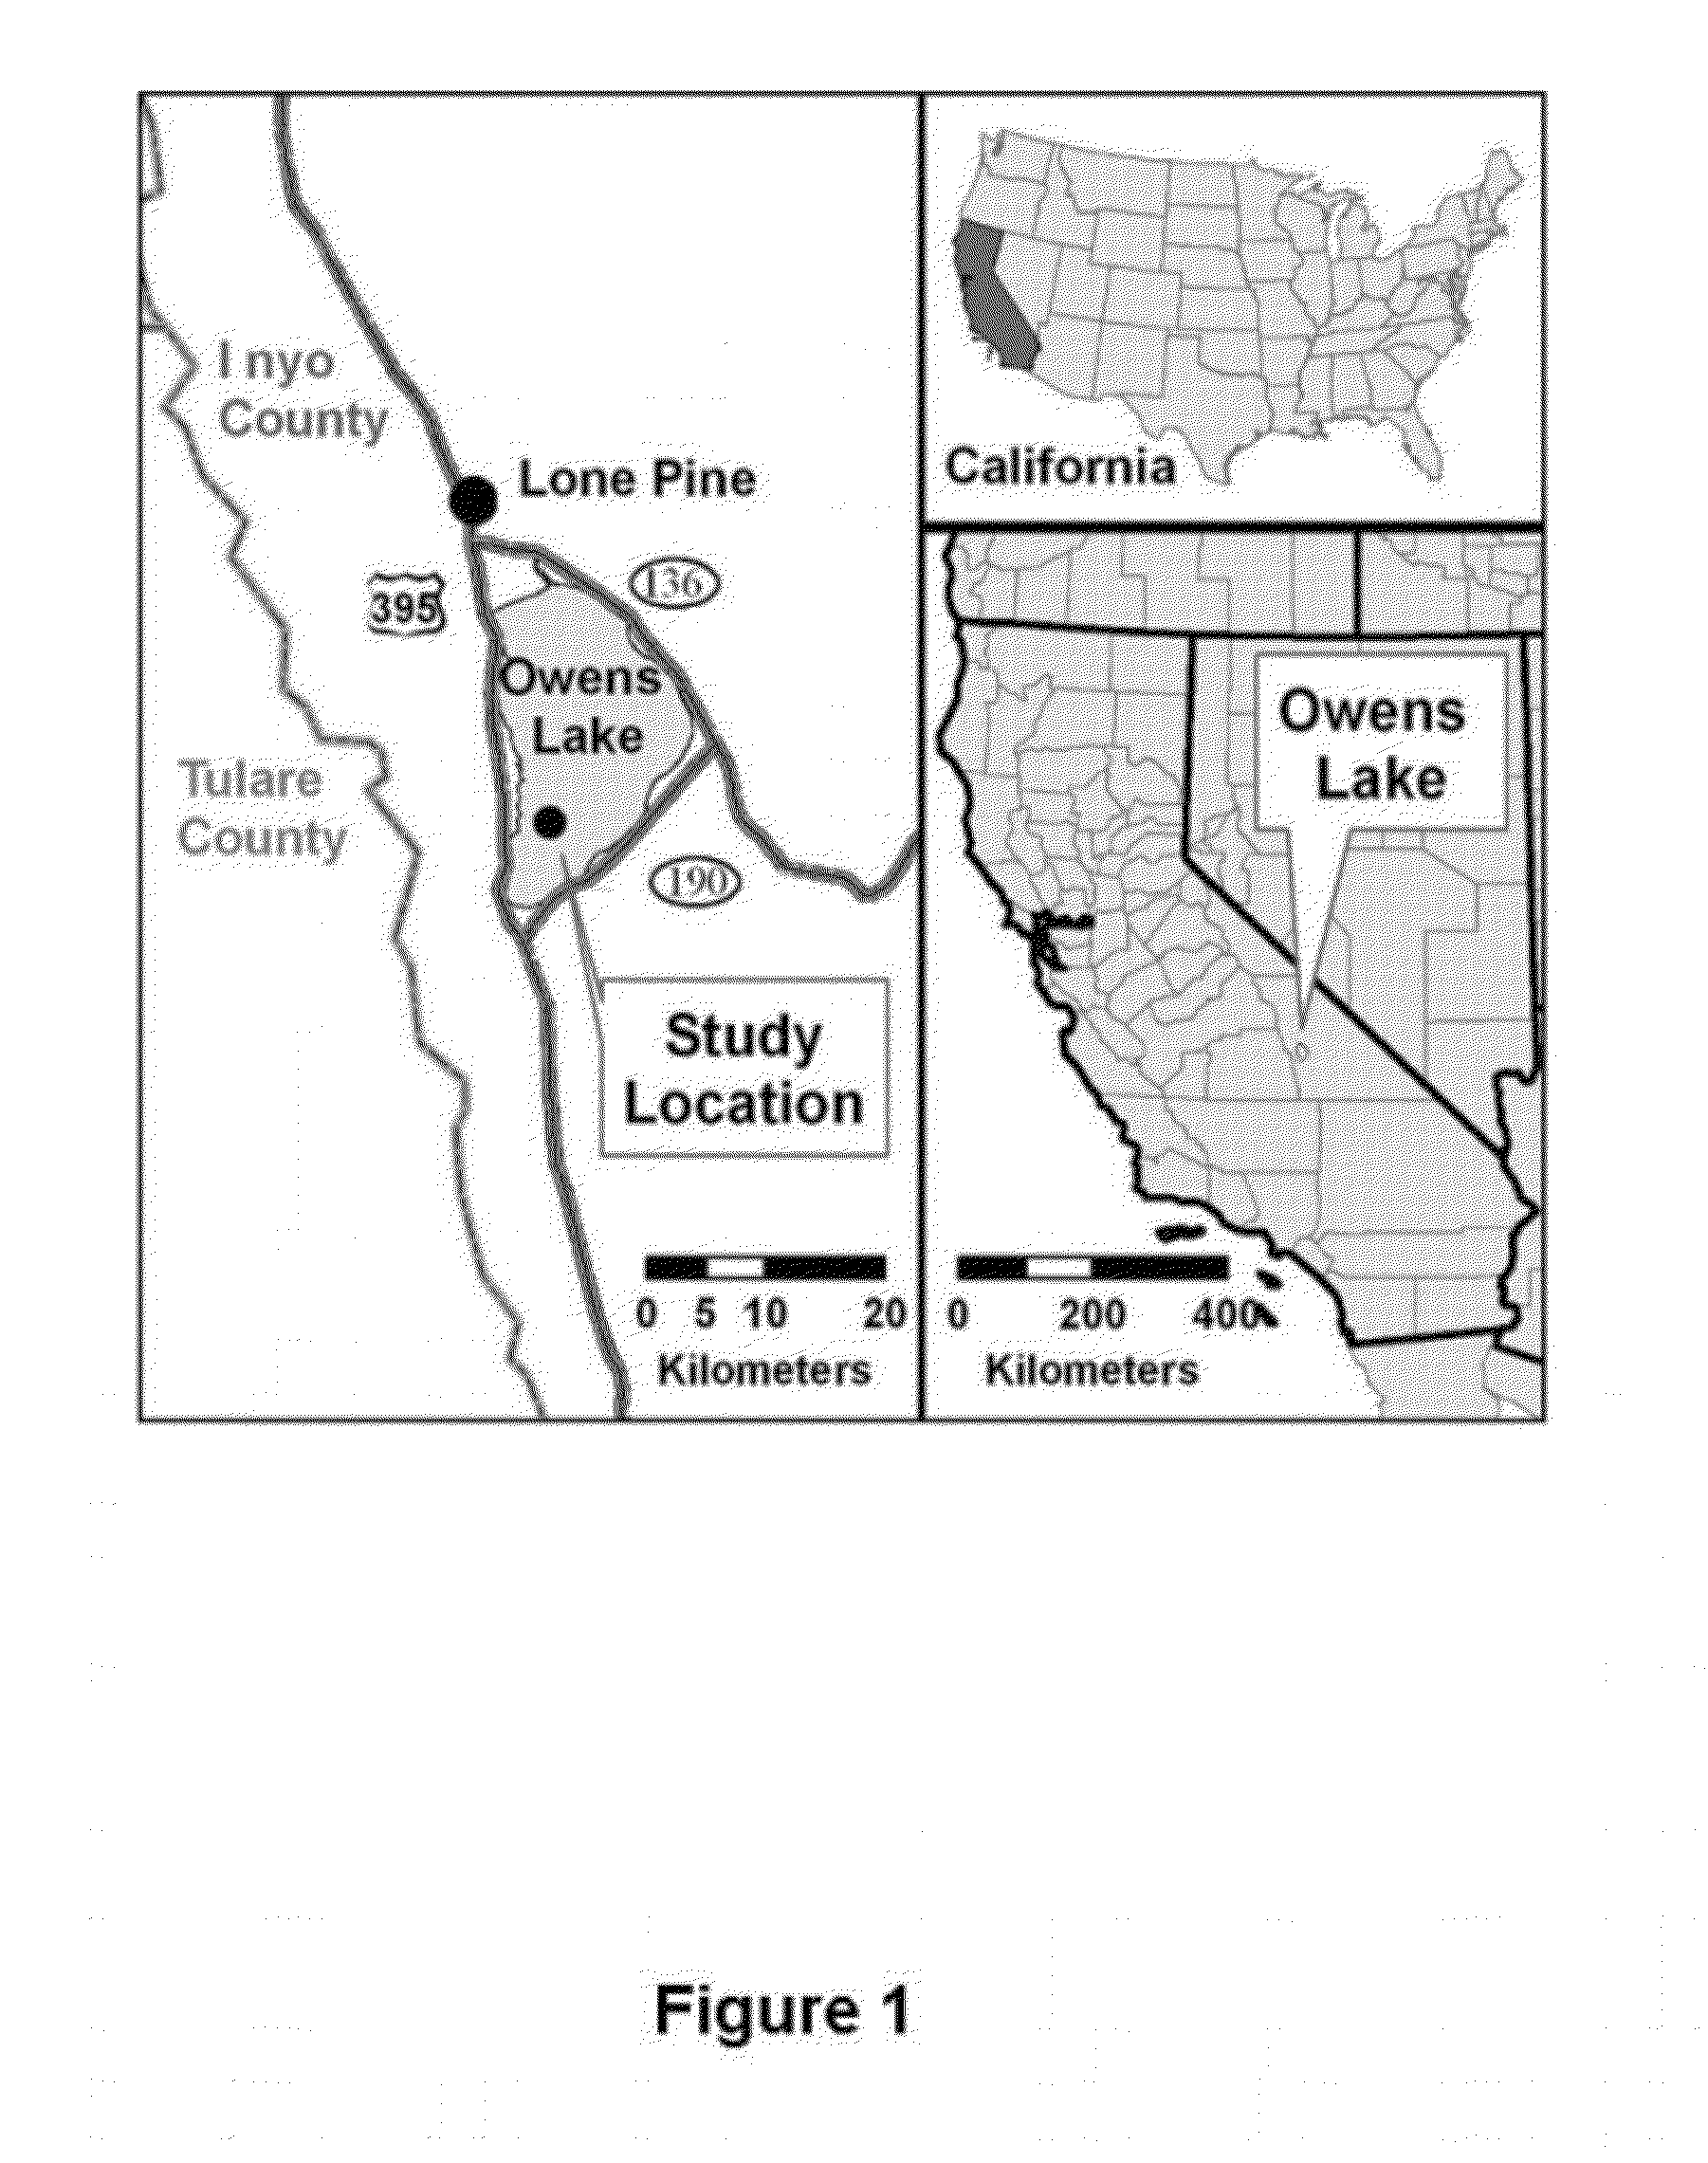 Method for dust control on saline dry lakebeds using minimal water resources